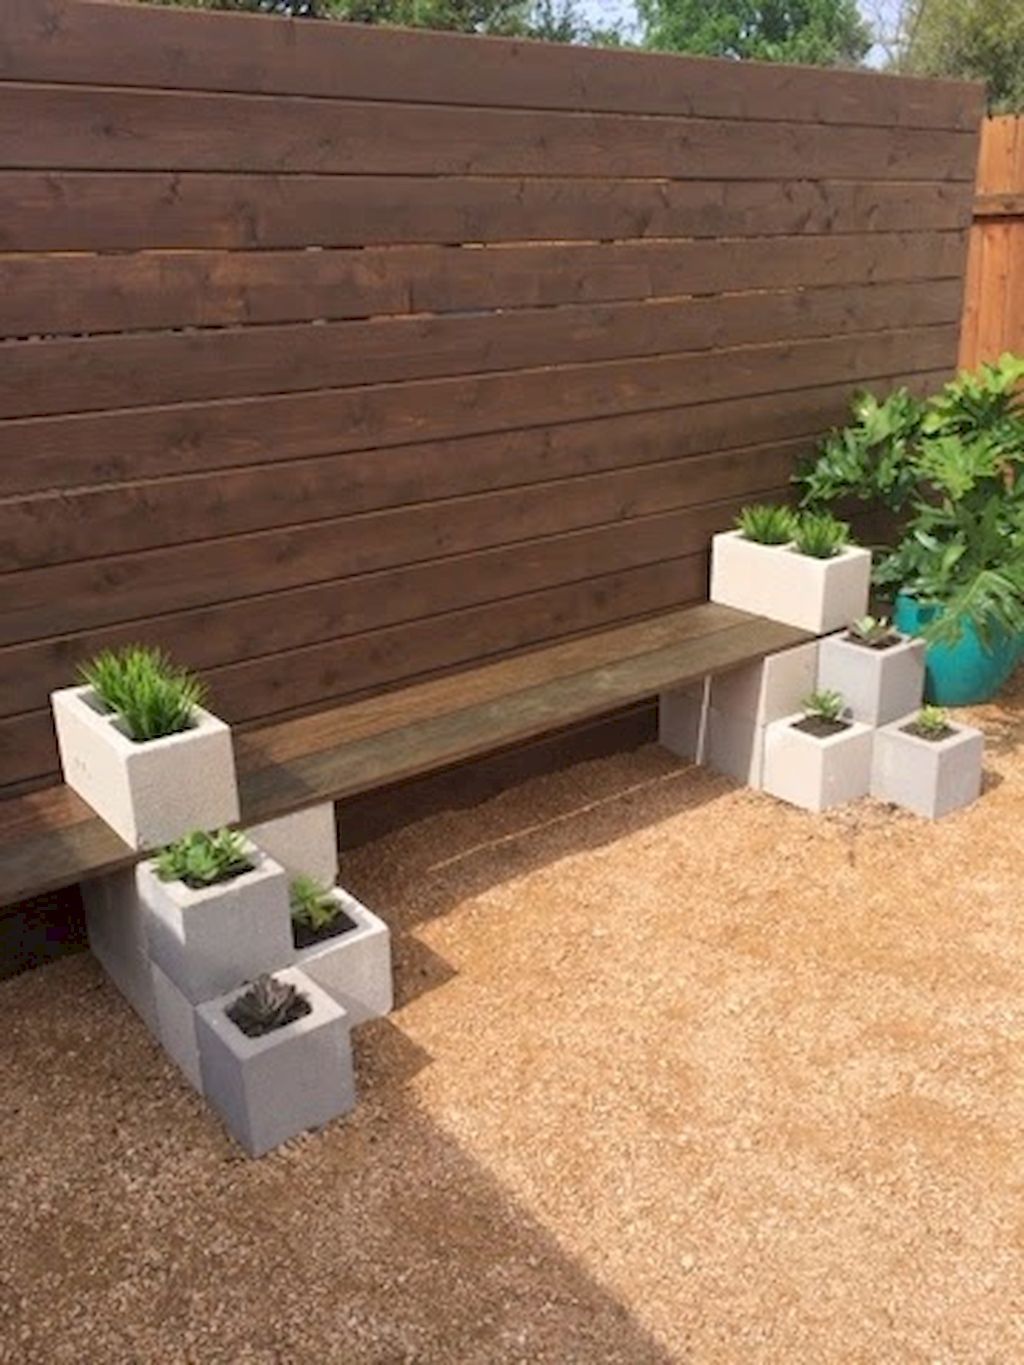 17 diy projects for the home backyards ideas